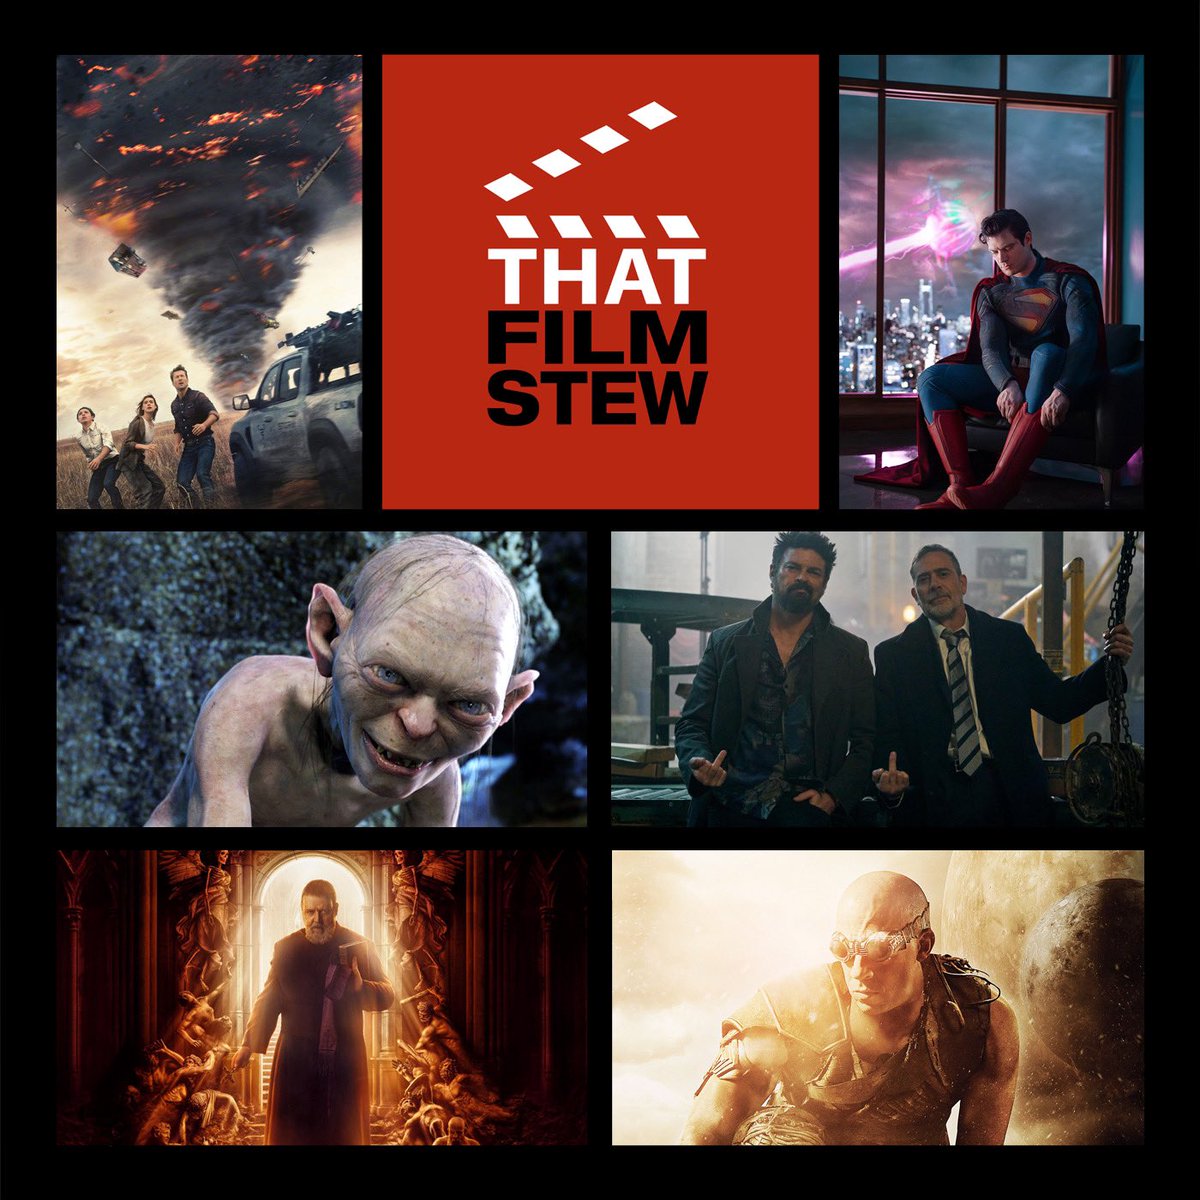 The most recent news stories from the world of film and television. Listen HERE: soundcloud.com/thatfilmstew/t… #Podcast #Film #TVSeries #News #TheFantasticFour #MOTU #Twisters #RoadHouse2 #Superman #RiddickFurya #TheHuntForGollum #ThePopesExorcist2 #PodcastHQ #FilmTwitter